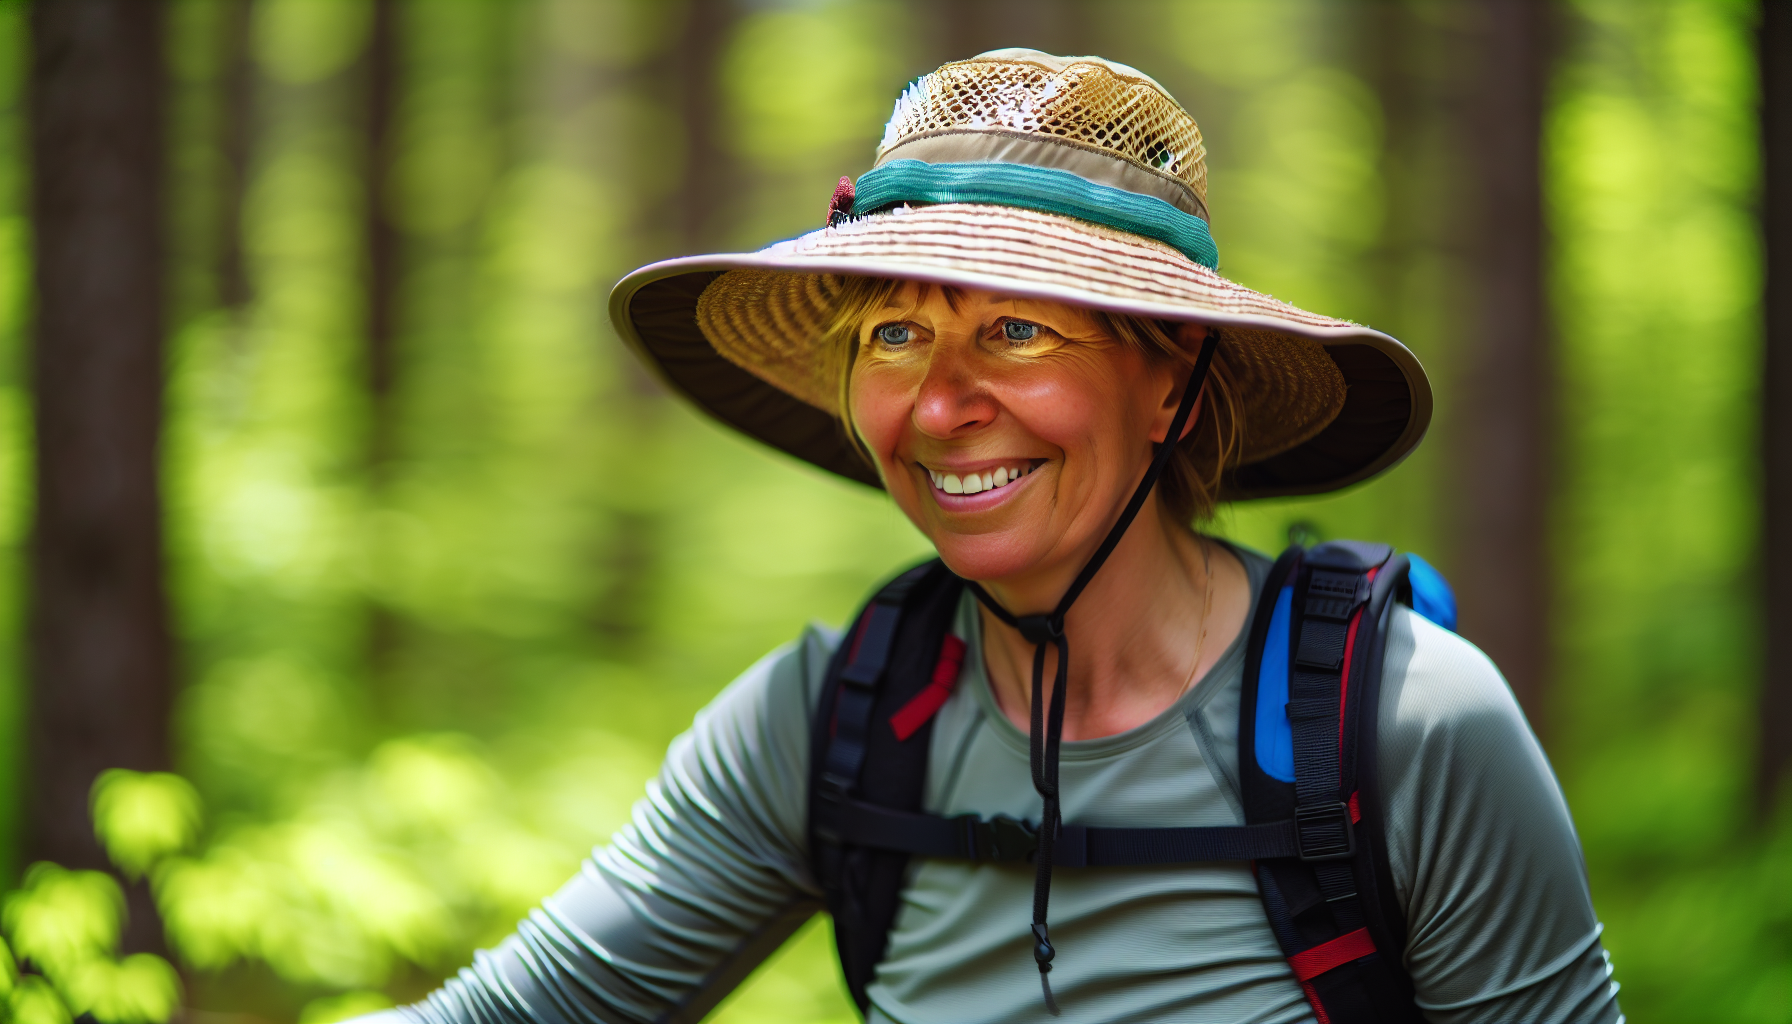 A woman wearing a durable sun hat during outdoor activities